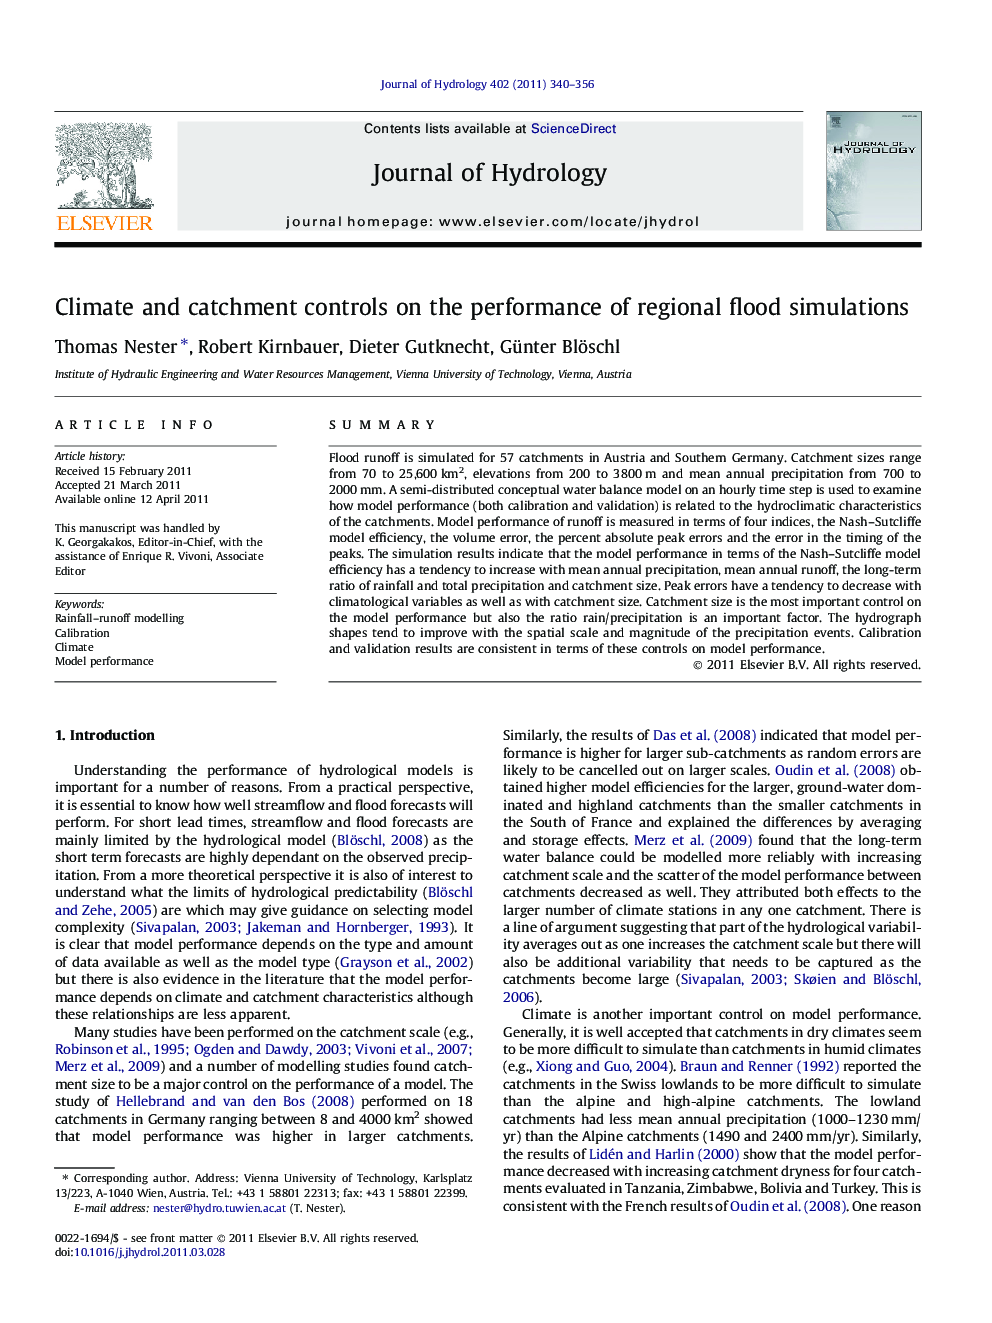 Climate and catchment controls on the performance of regional flood simulations